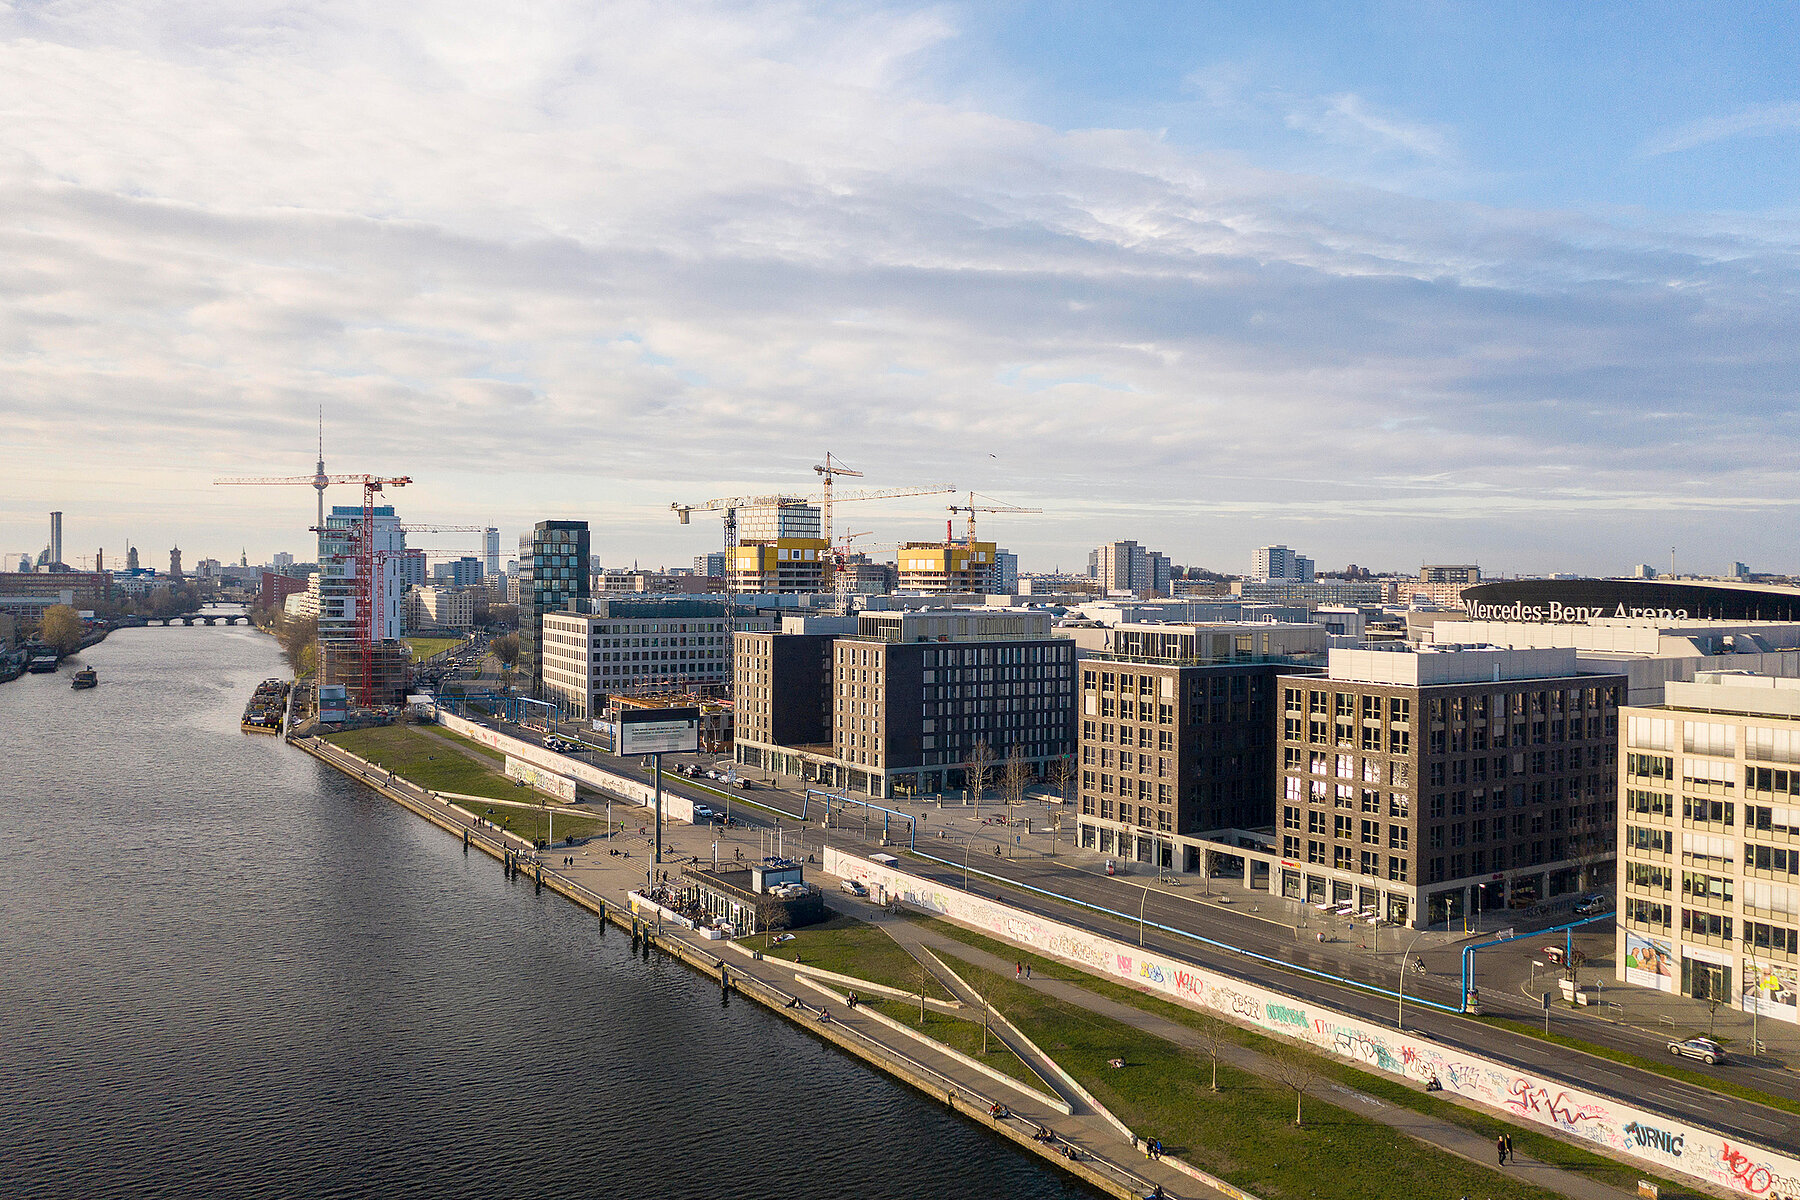 On the left the Spree, on the right the bank with the East Side Gallery and several new buildings behind it.